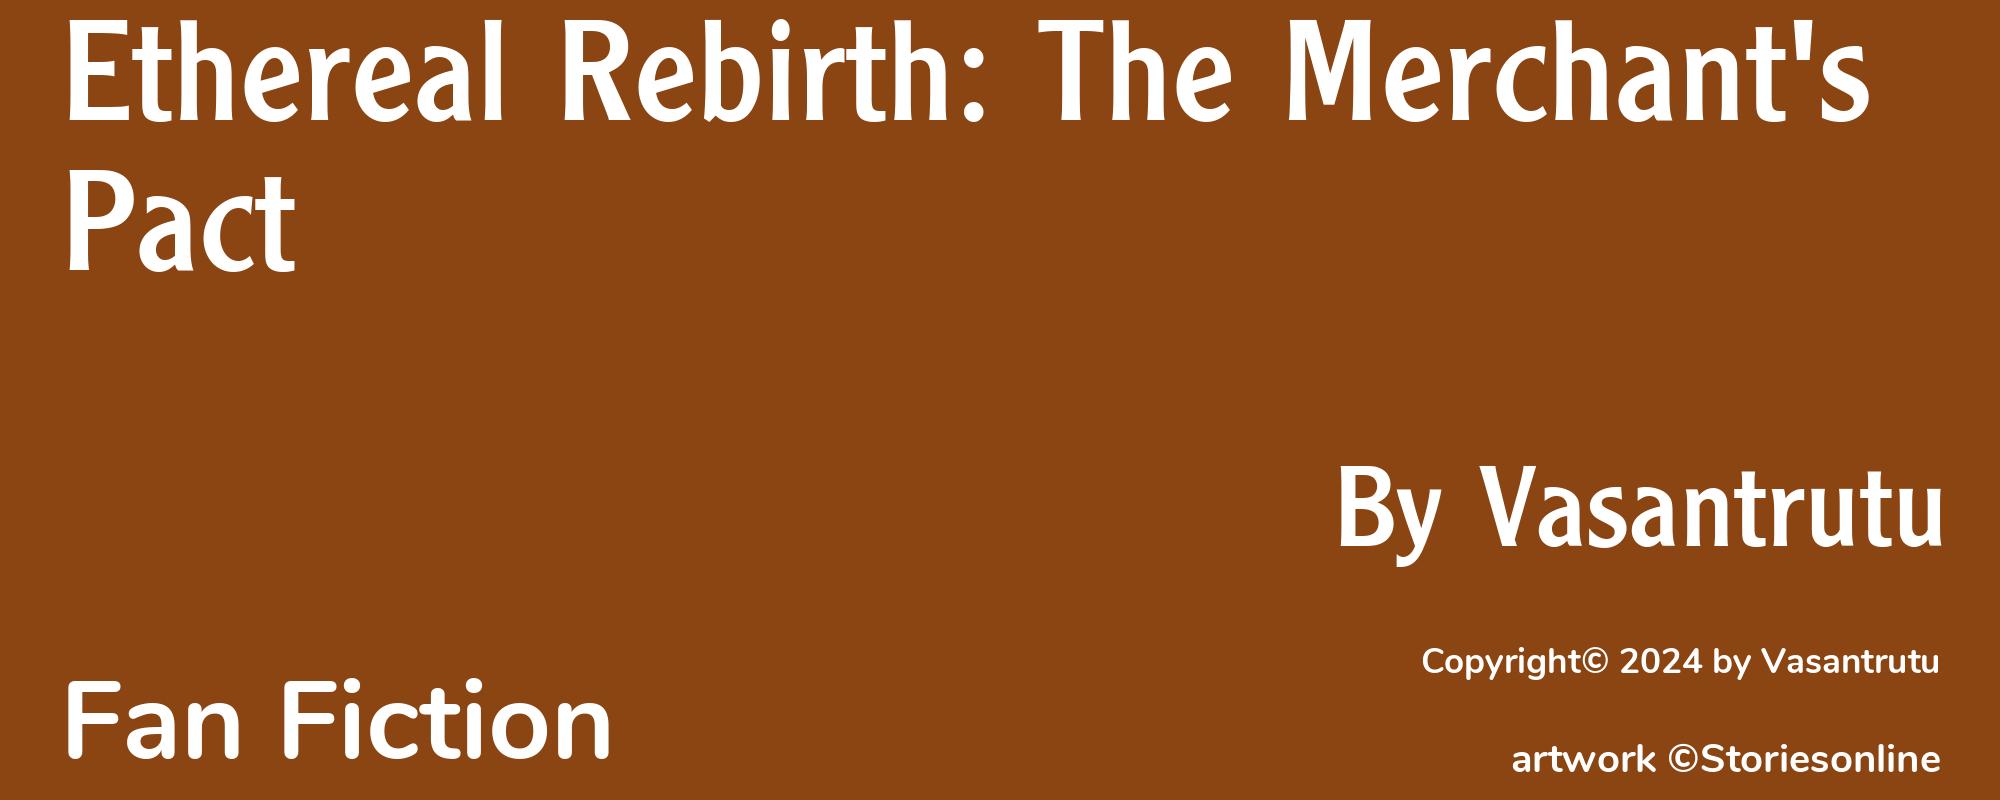 Ethereal Rebirth: The Merchant's Pact - Cover